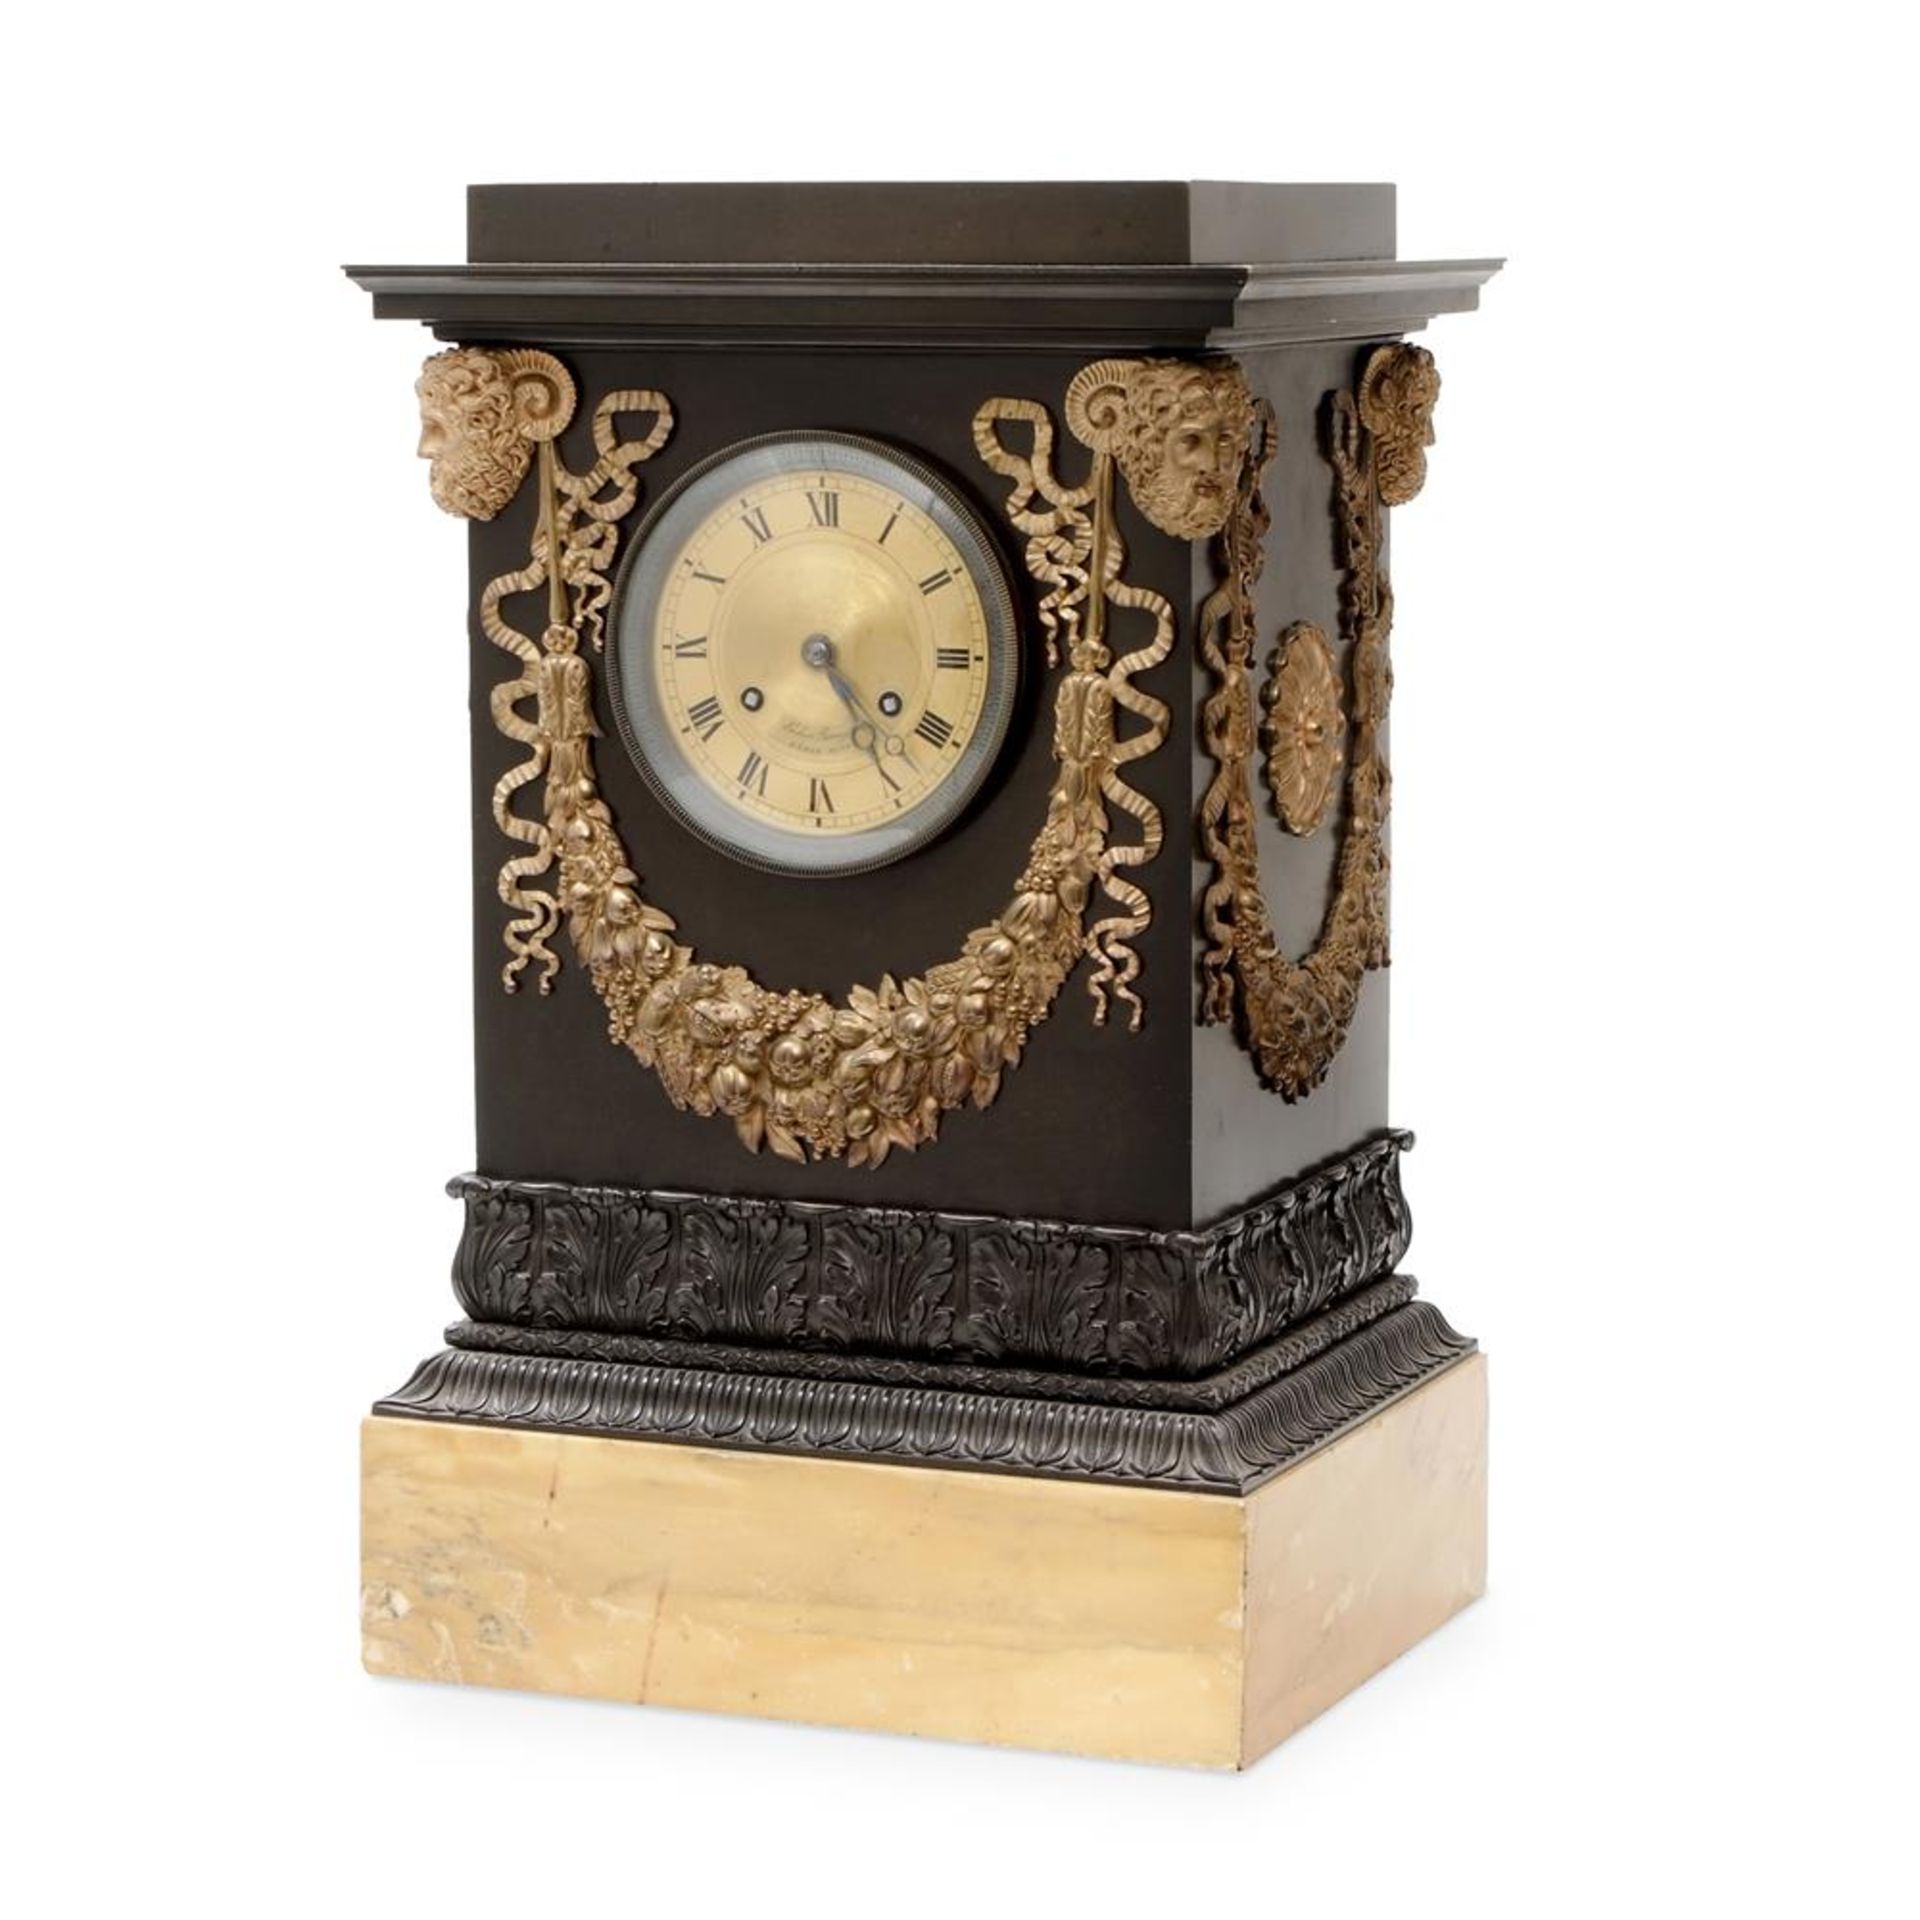 A FRENCH EMPIRE BRONZE MANTLE CLOCK ON SIENA BASE, CIRCA 1820